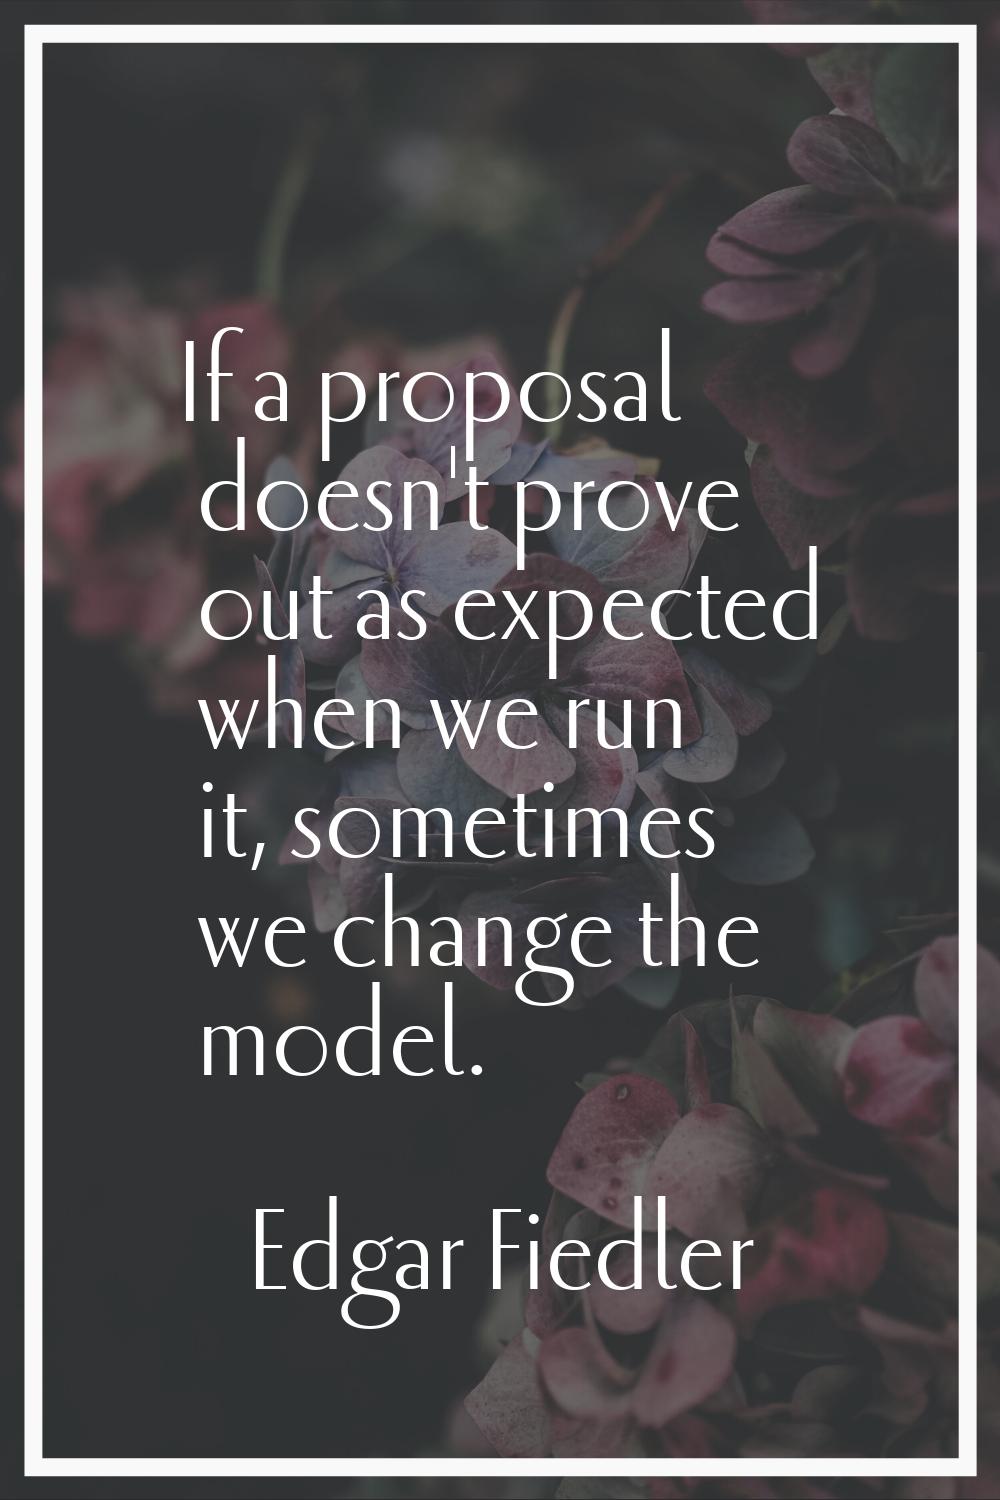 If a proposal doesn't prove out as expected when we run it, sometimes we change the model.